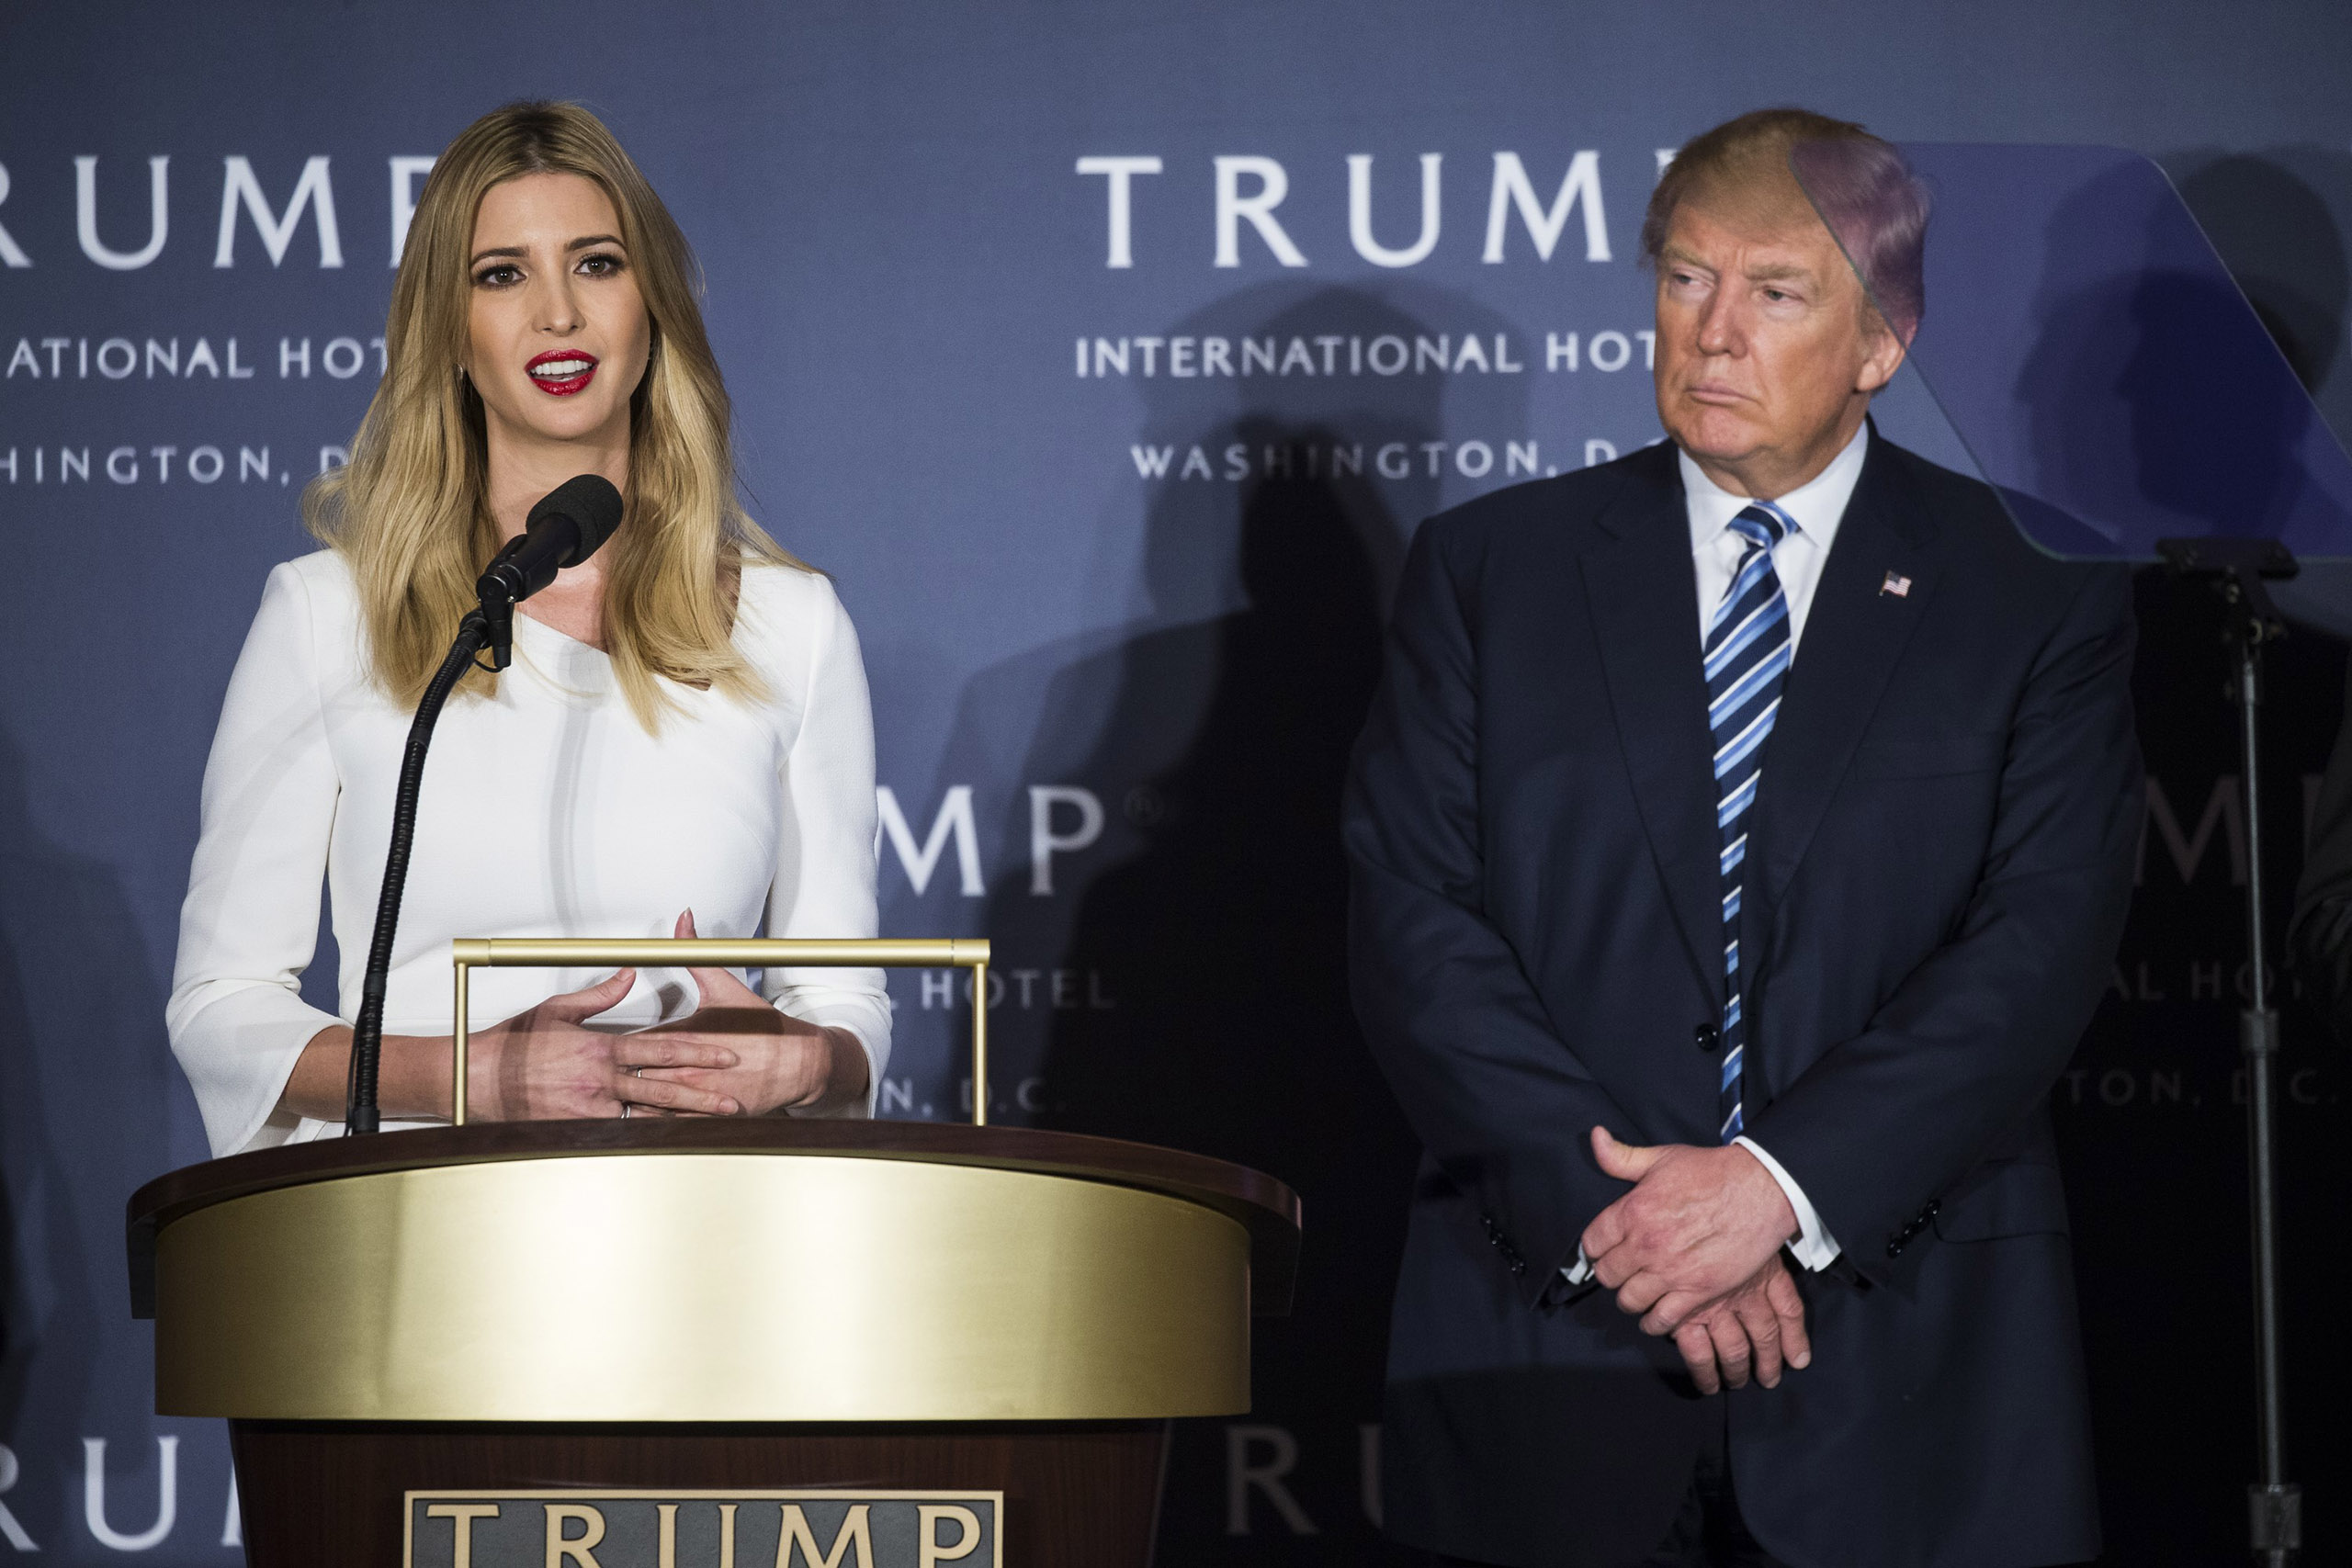 Ivanka Trump speaks as her father, Donald Trump, stands with her on stage during the opening ceremony for the Trump International Hotel, Old Post Office, in Washington on Oct. 26, 2016. (Samuel Corum—Anadolu Agency/Getty Images)